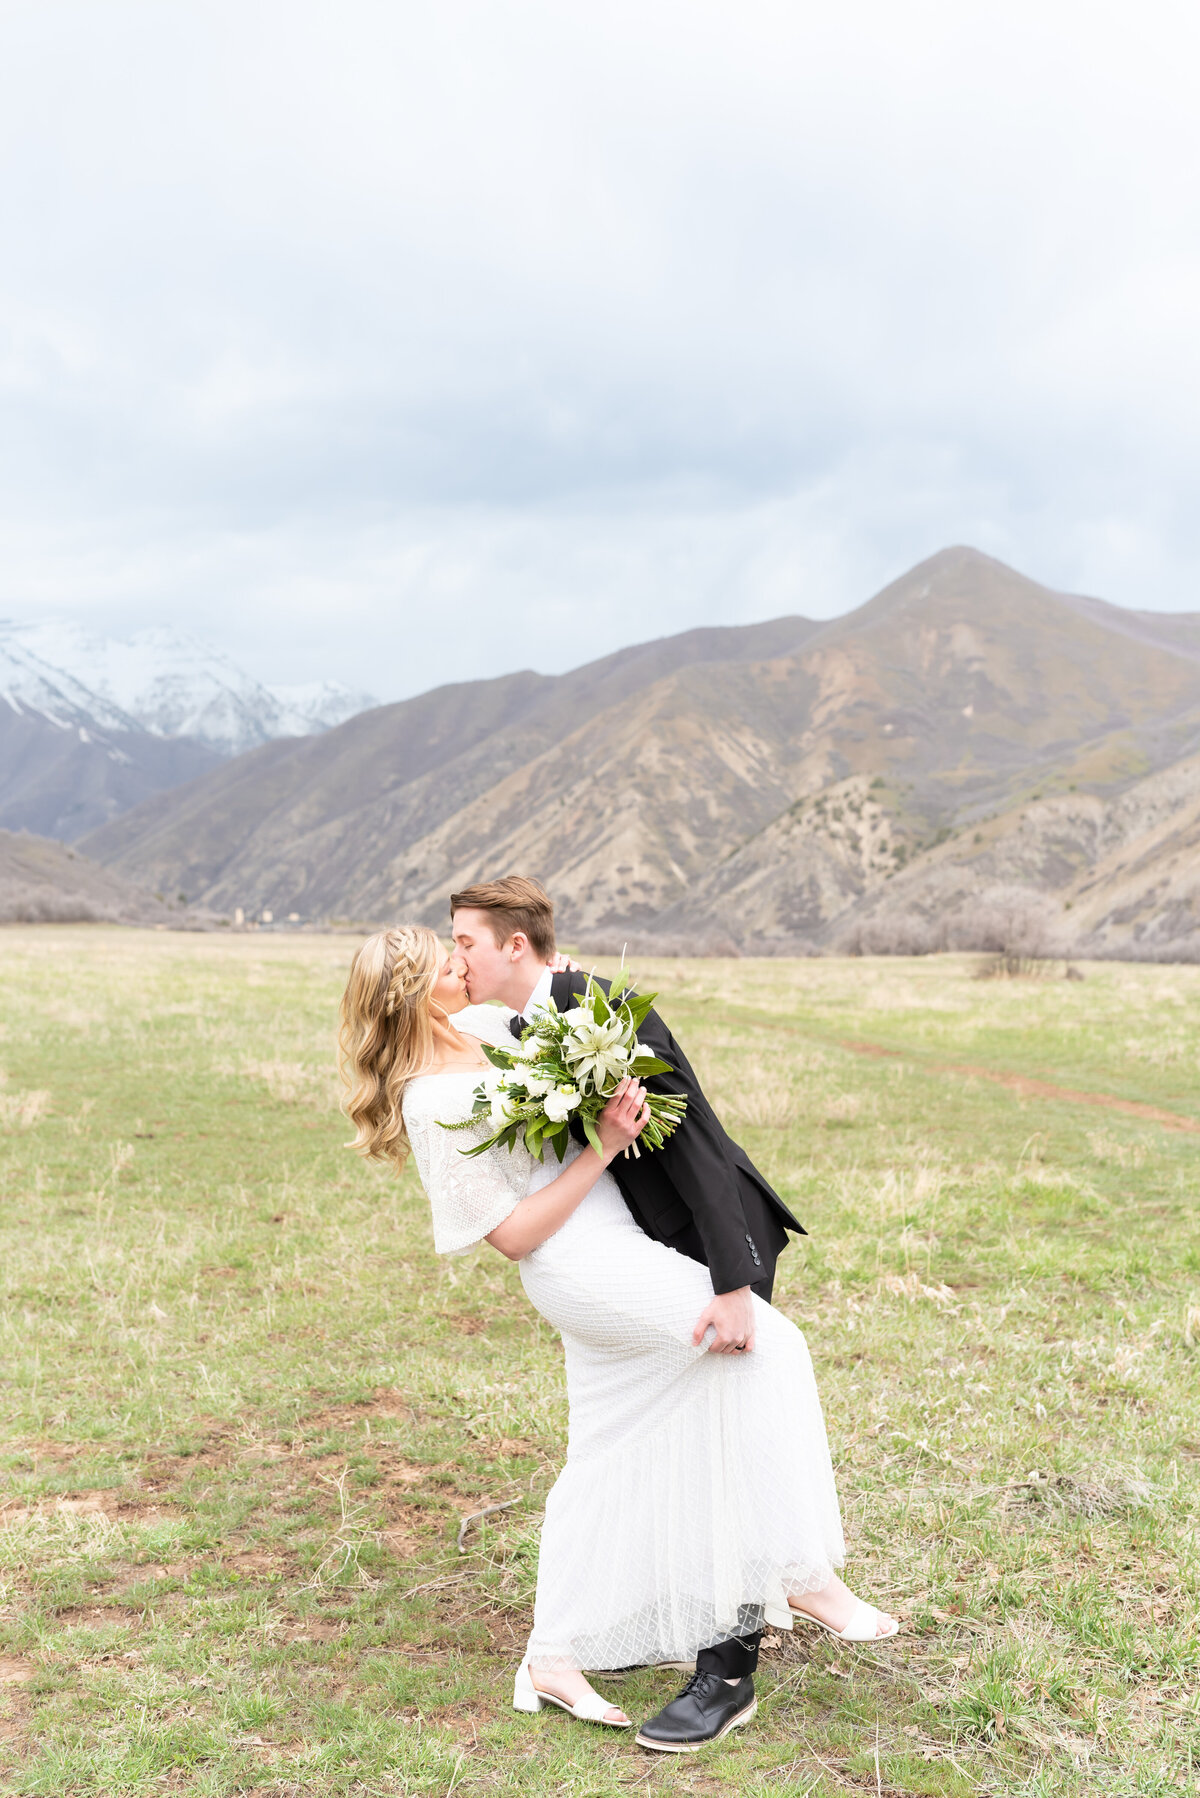 Groom kissing his bride with mountain landscape